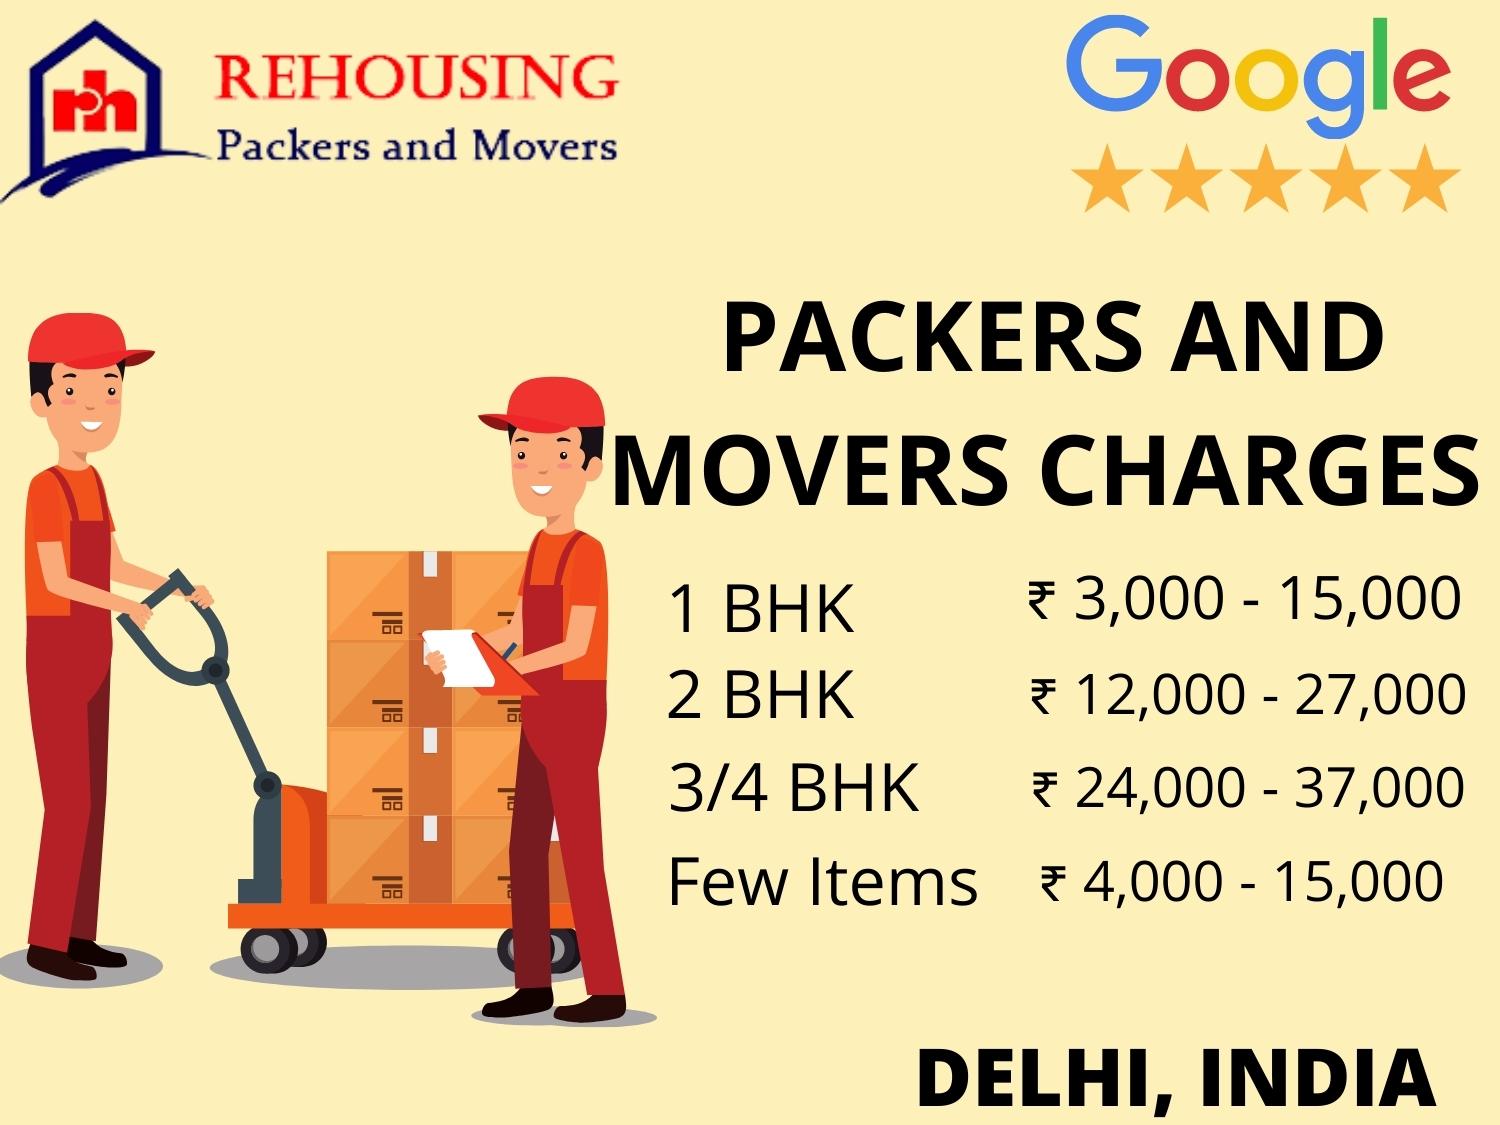 Rehousing packers and movers Reviews system